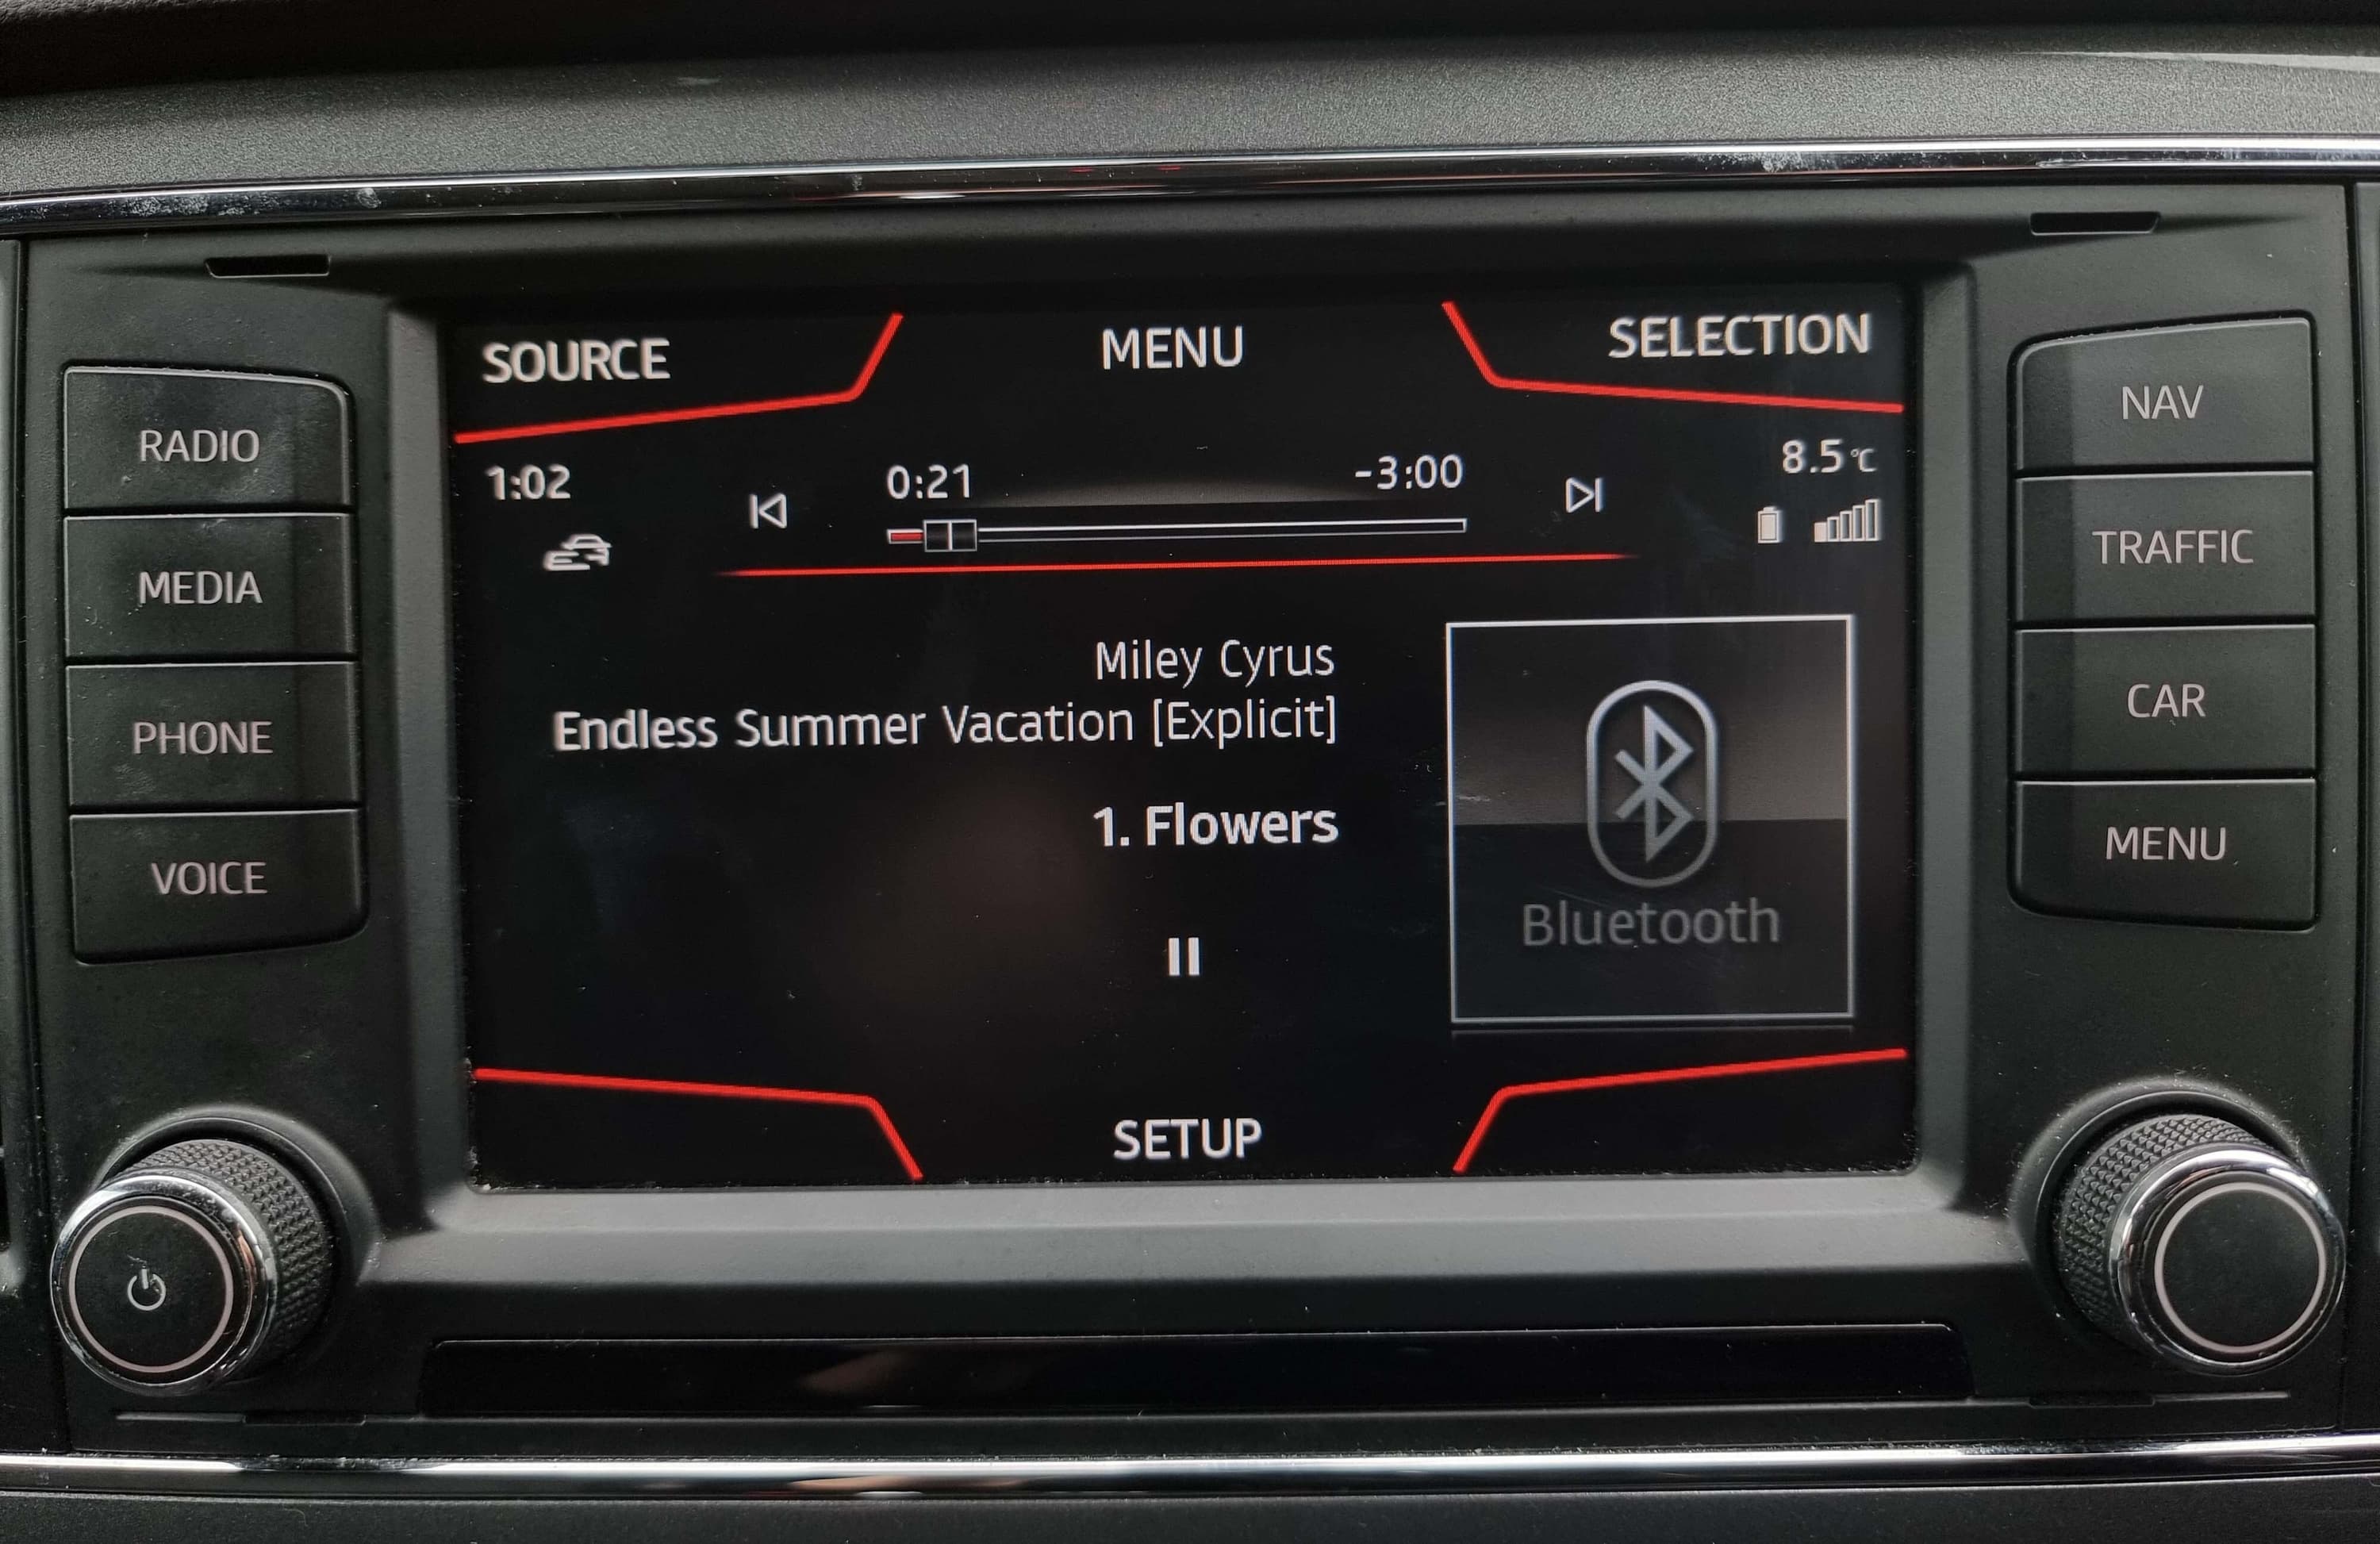 The screen and buttons of an car stereo. The screen shows a song playing and the Bluetooth symbol shows tis on the right hand side of the screen.